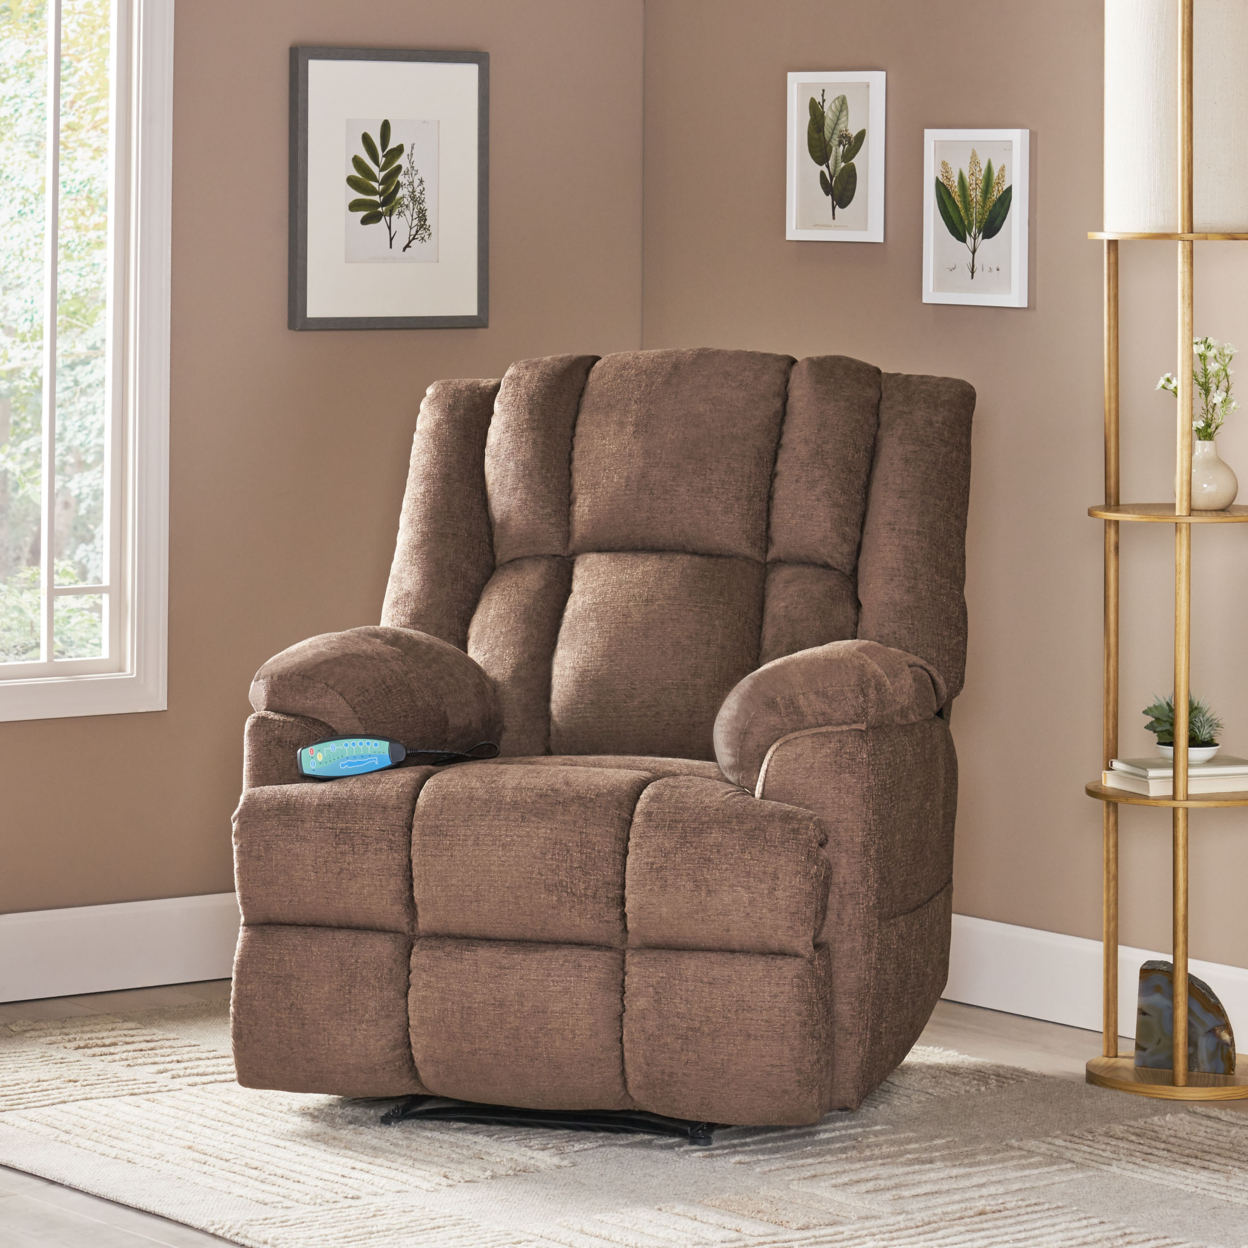 Siloam Contemporary Pillow Tufted Massage Recliner - Black/brown